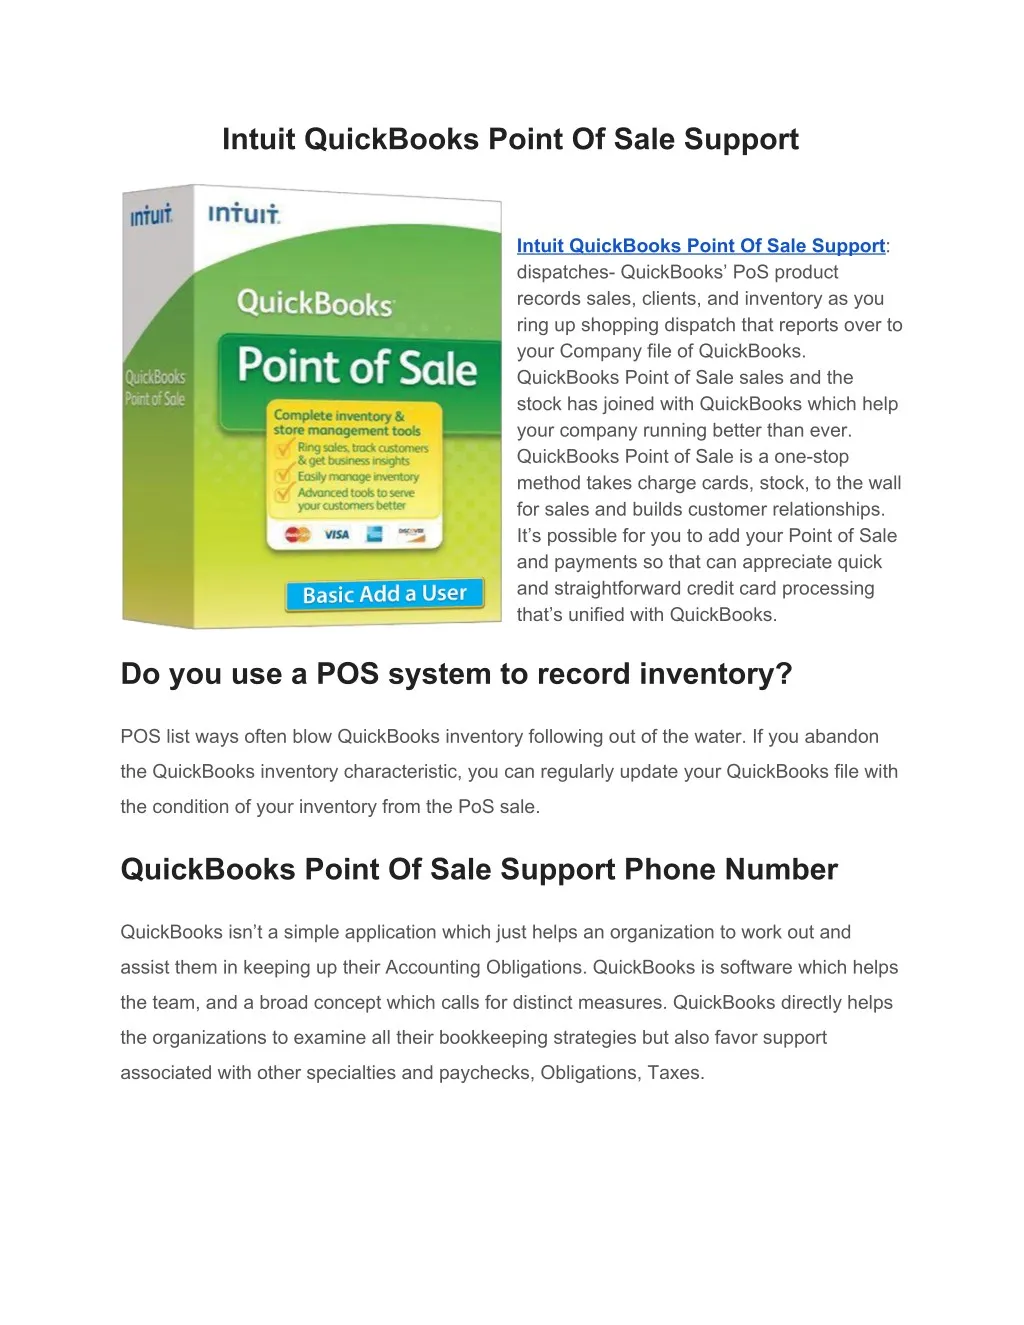 intuit quickbooks point of sale support